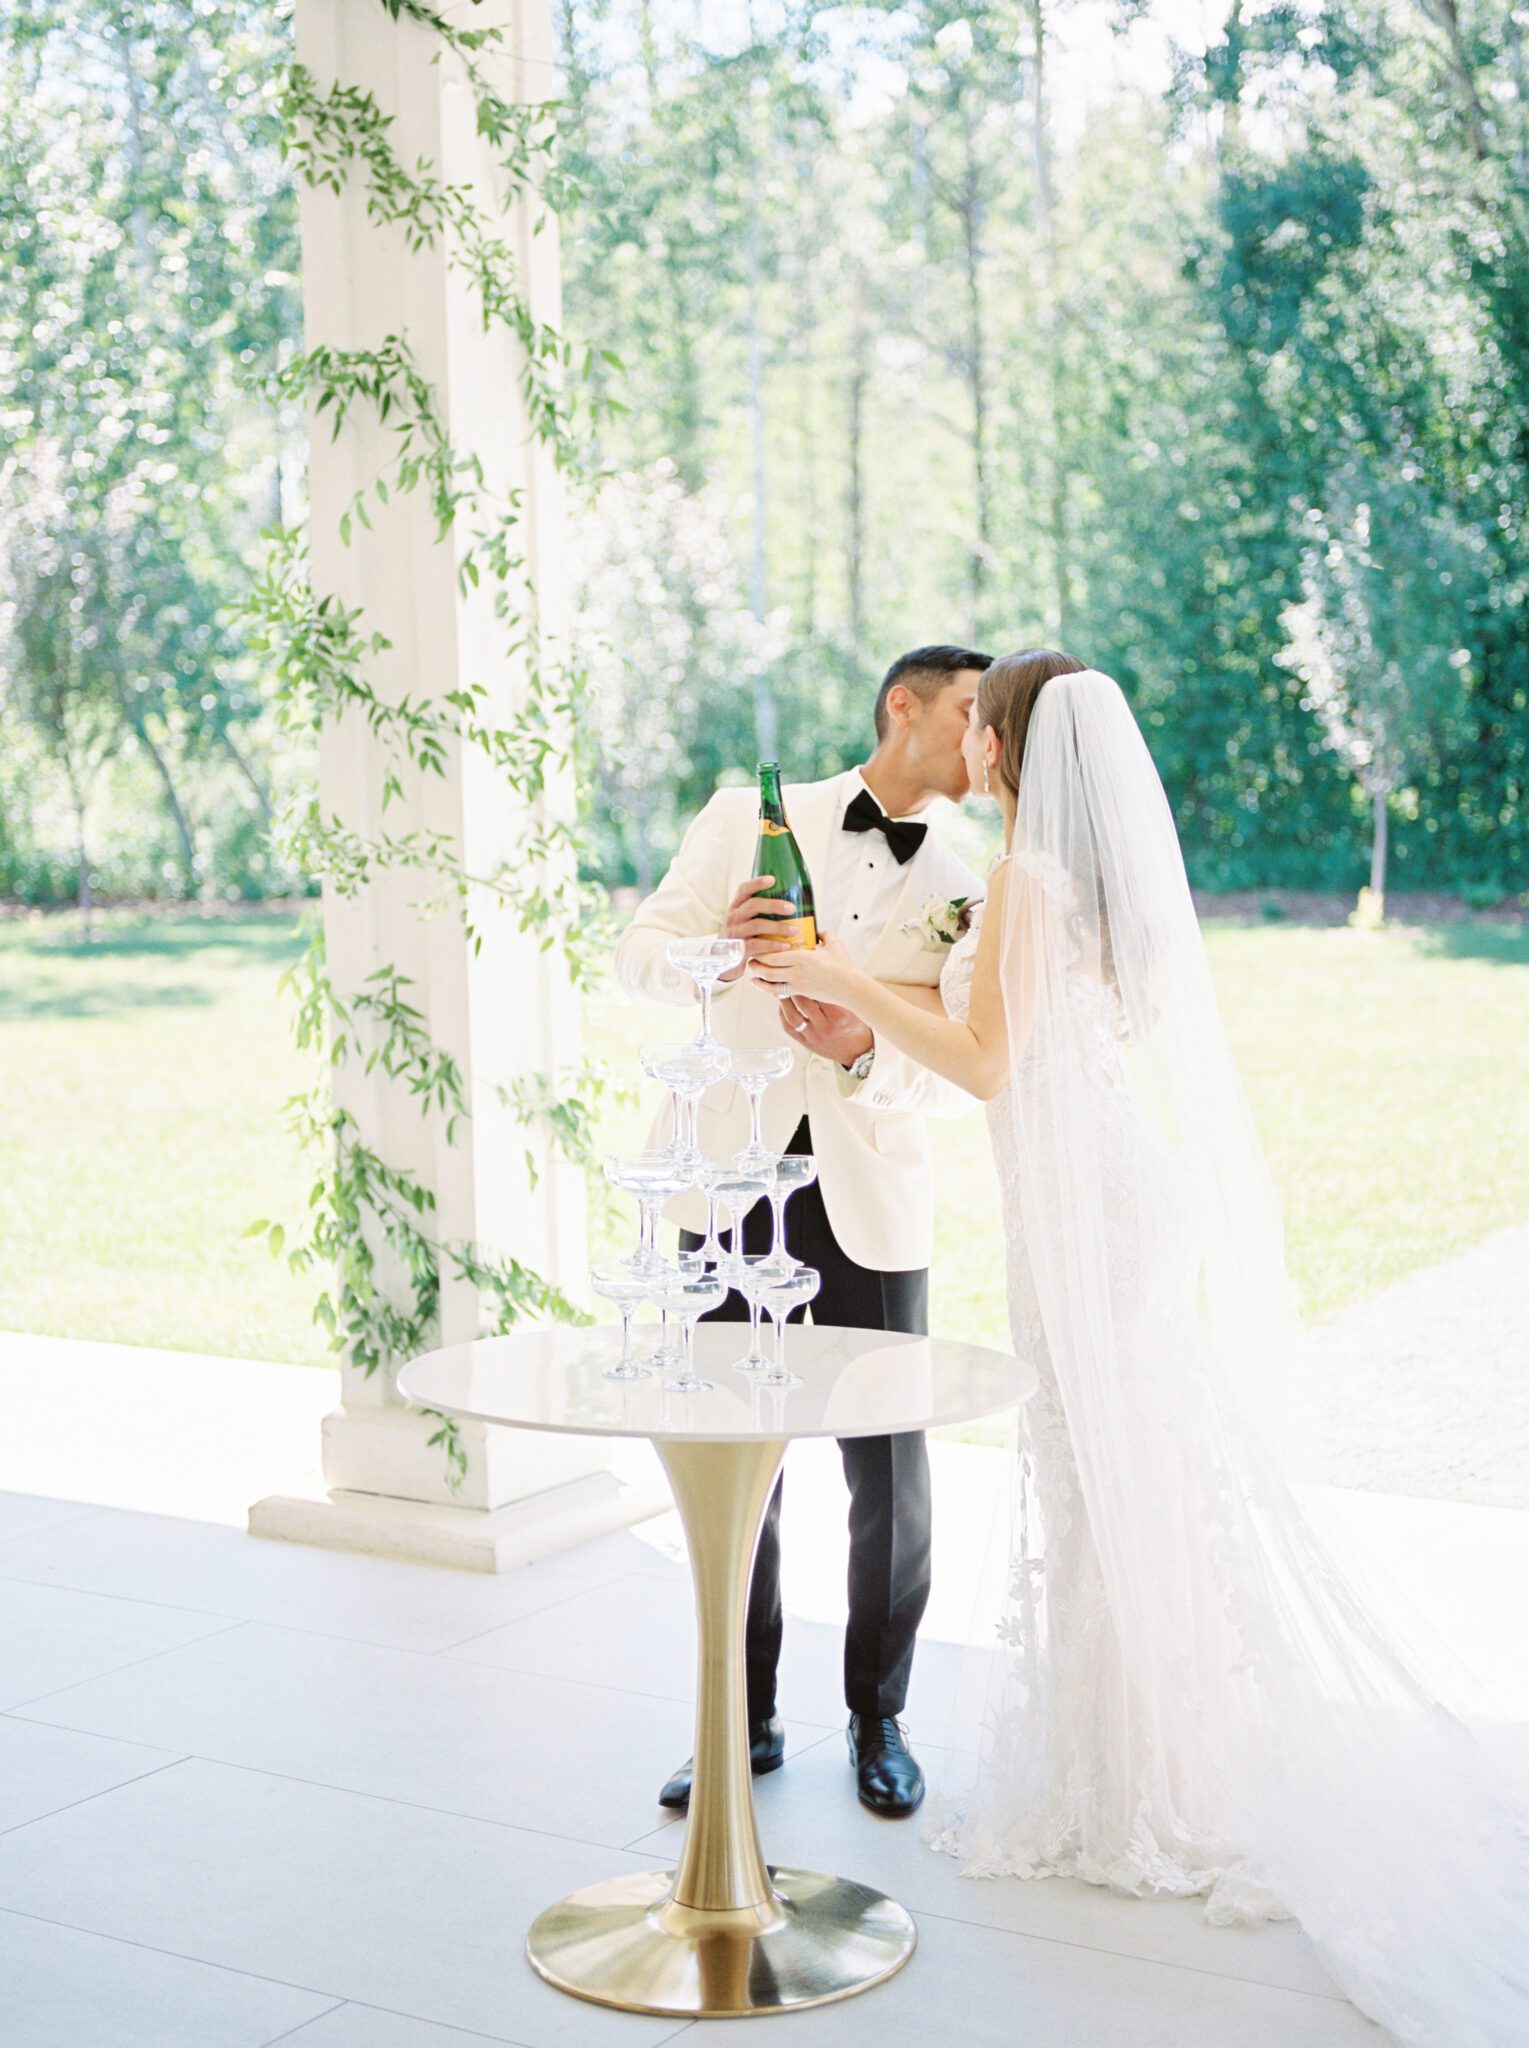 Couple popping champagne at Timeless Summer Wedding reception at Sparrow Lane Events in Alberta. Summer wedding features white roses, greenery blush decor accents and warm wood tones.